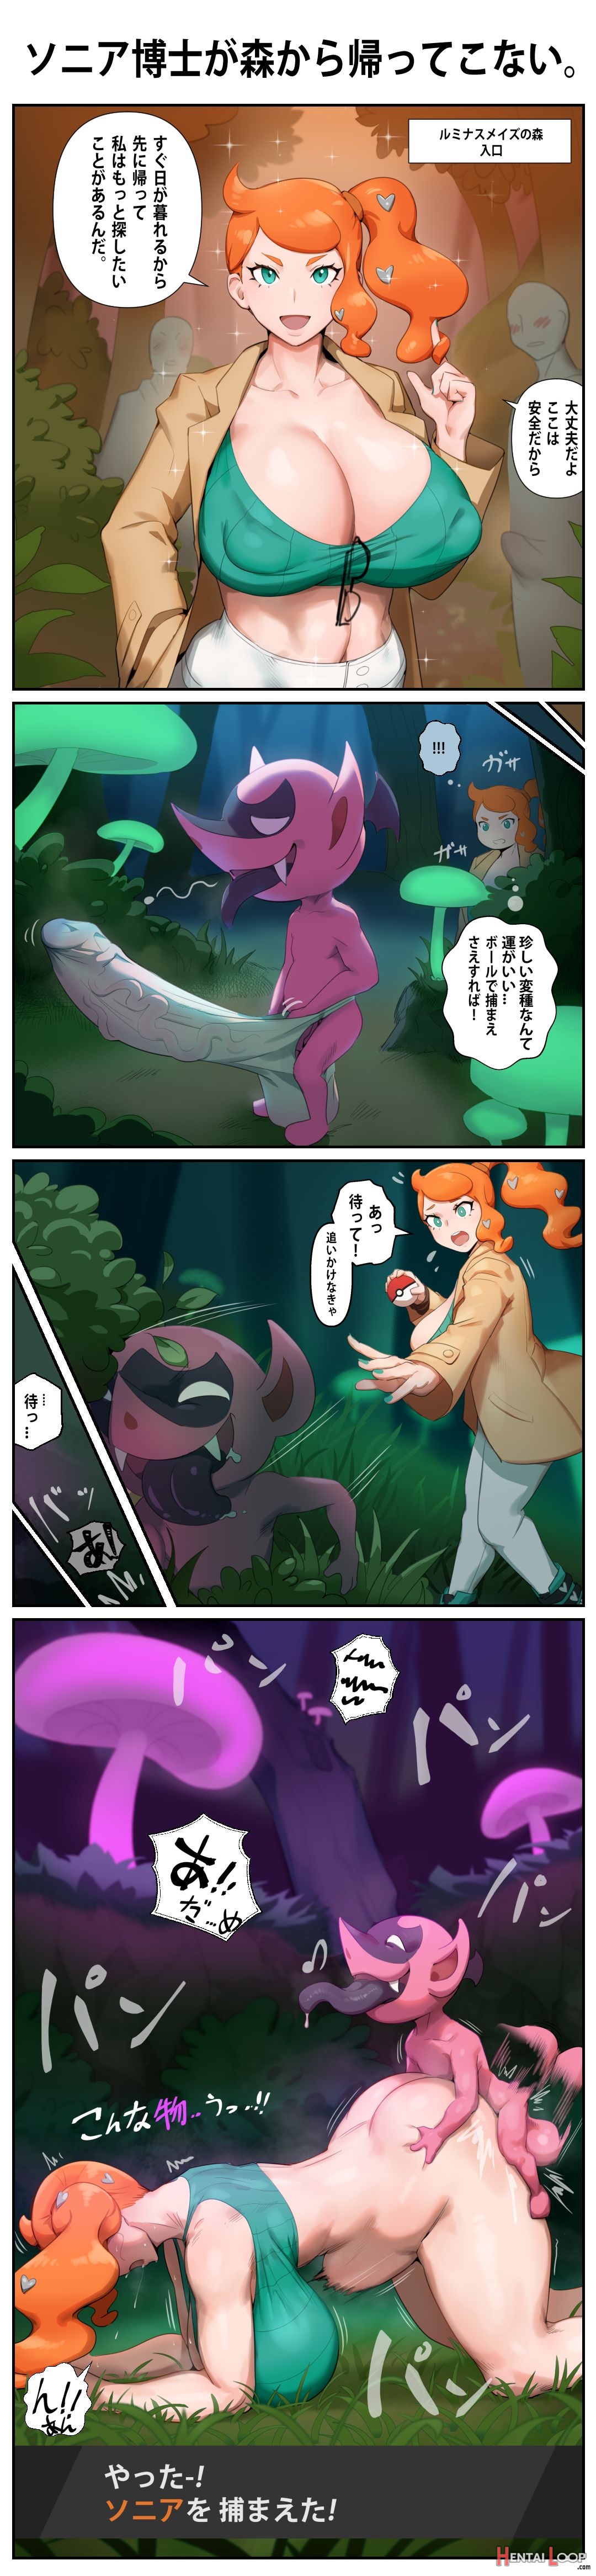 Sonia Does Not Return From The Forest. page 10